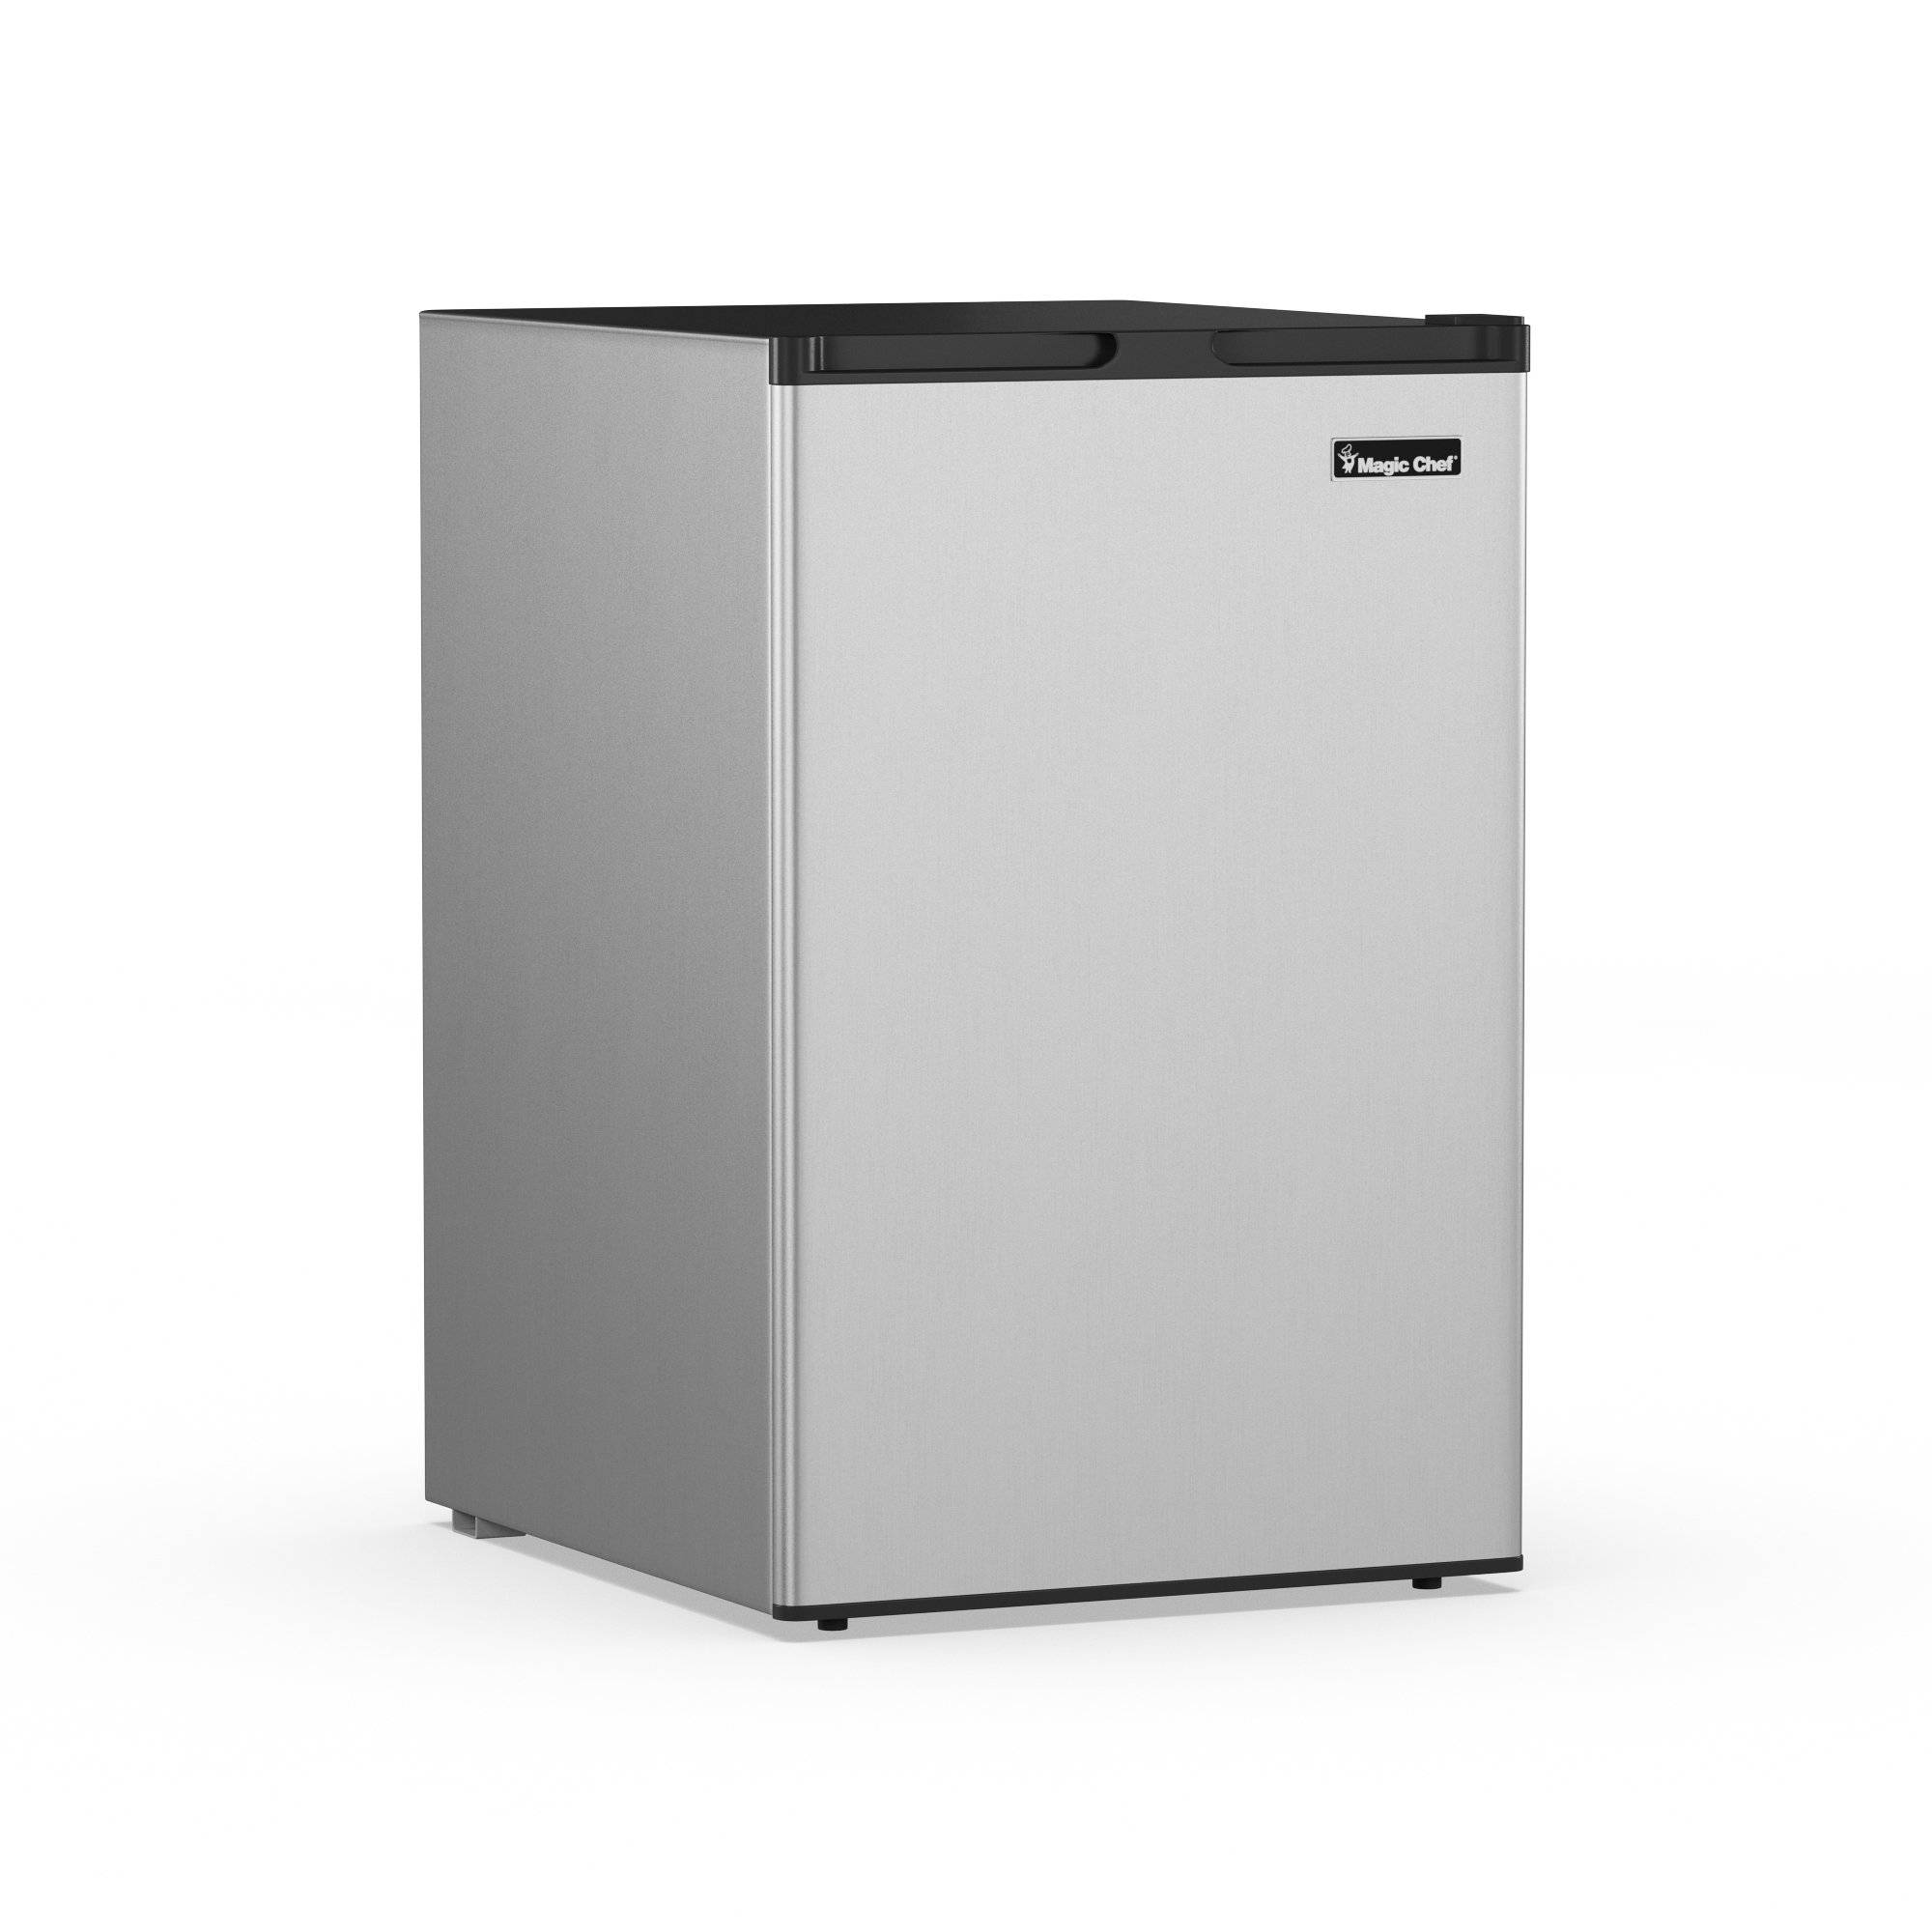 Magic Chef 3.0 Cu ft Upright Freezer Stainless